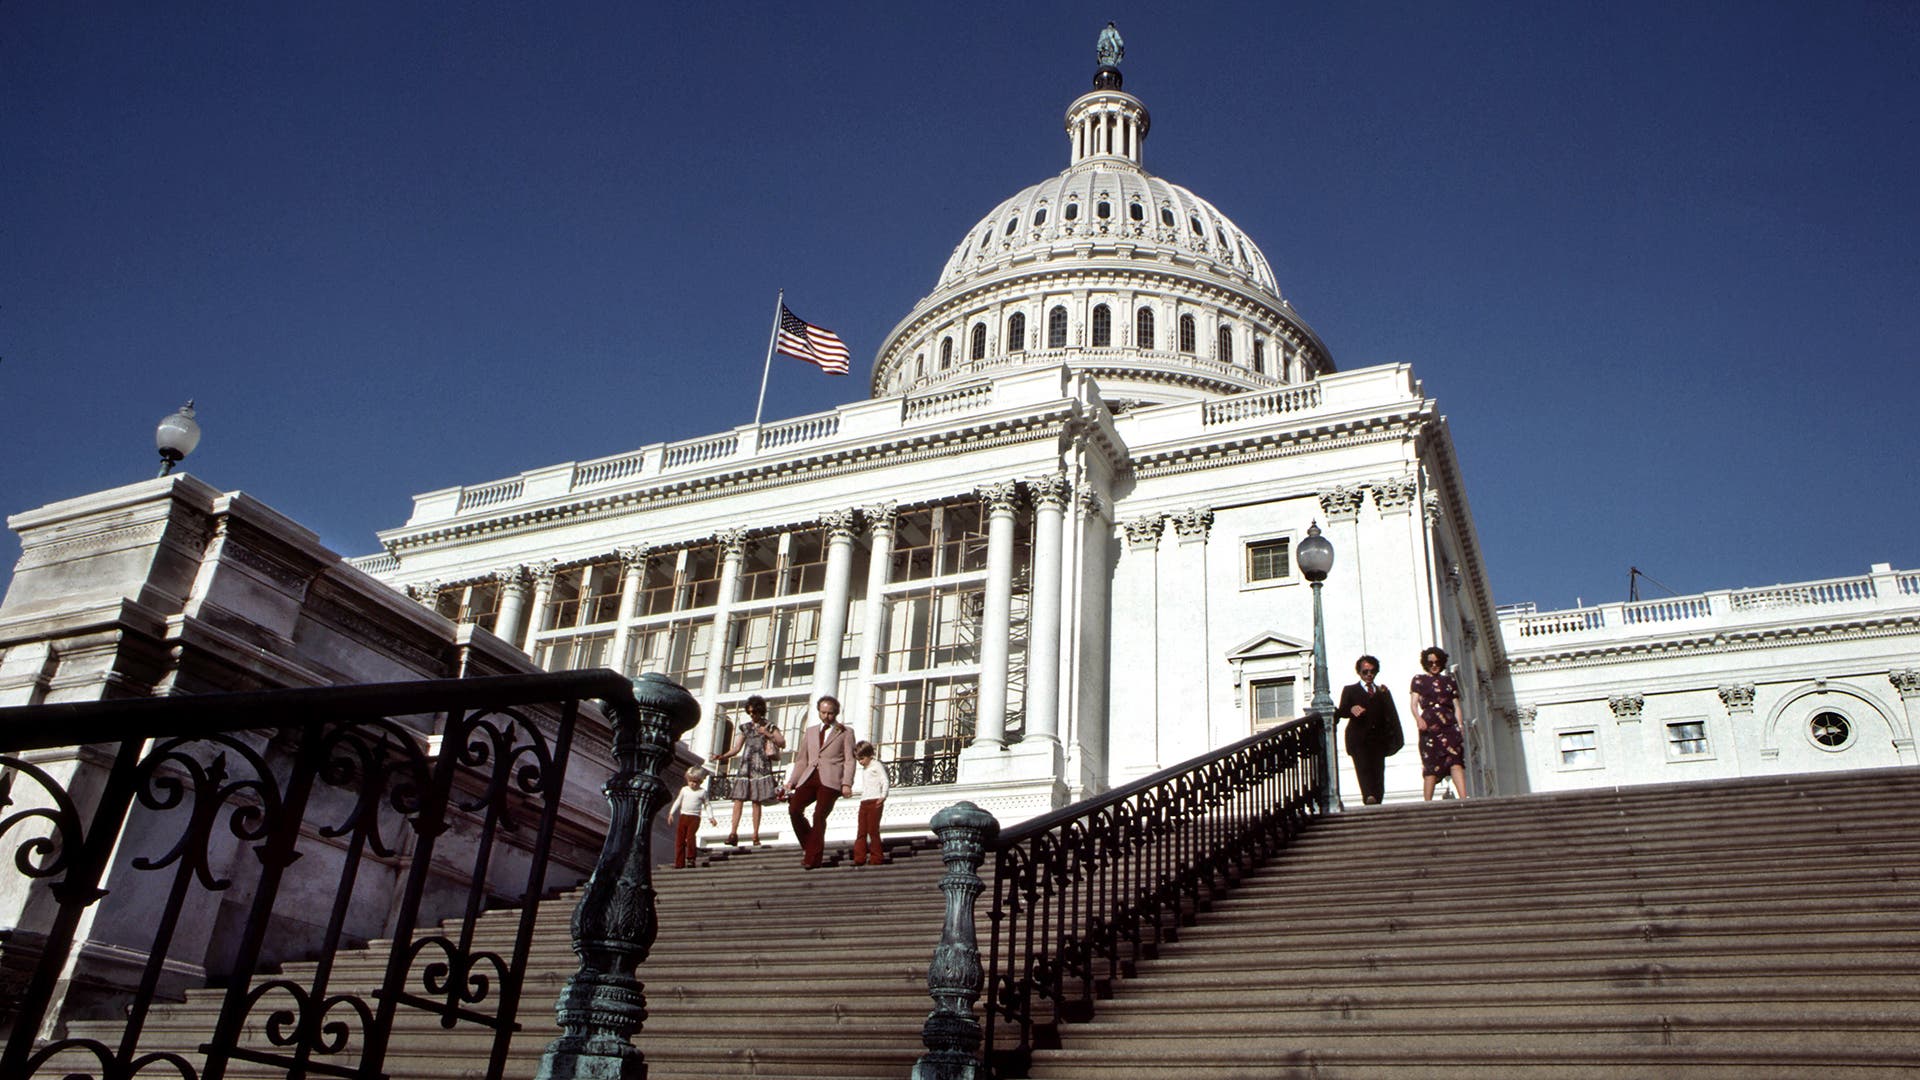 Visitors leave the United States Capitol, the seat of the United States Congress and the legislative branch of the U.S. government, in Washington, D.C.